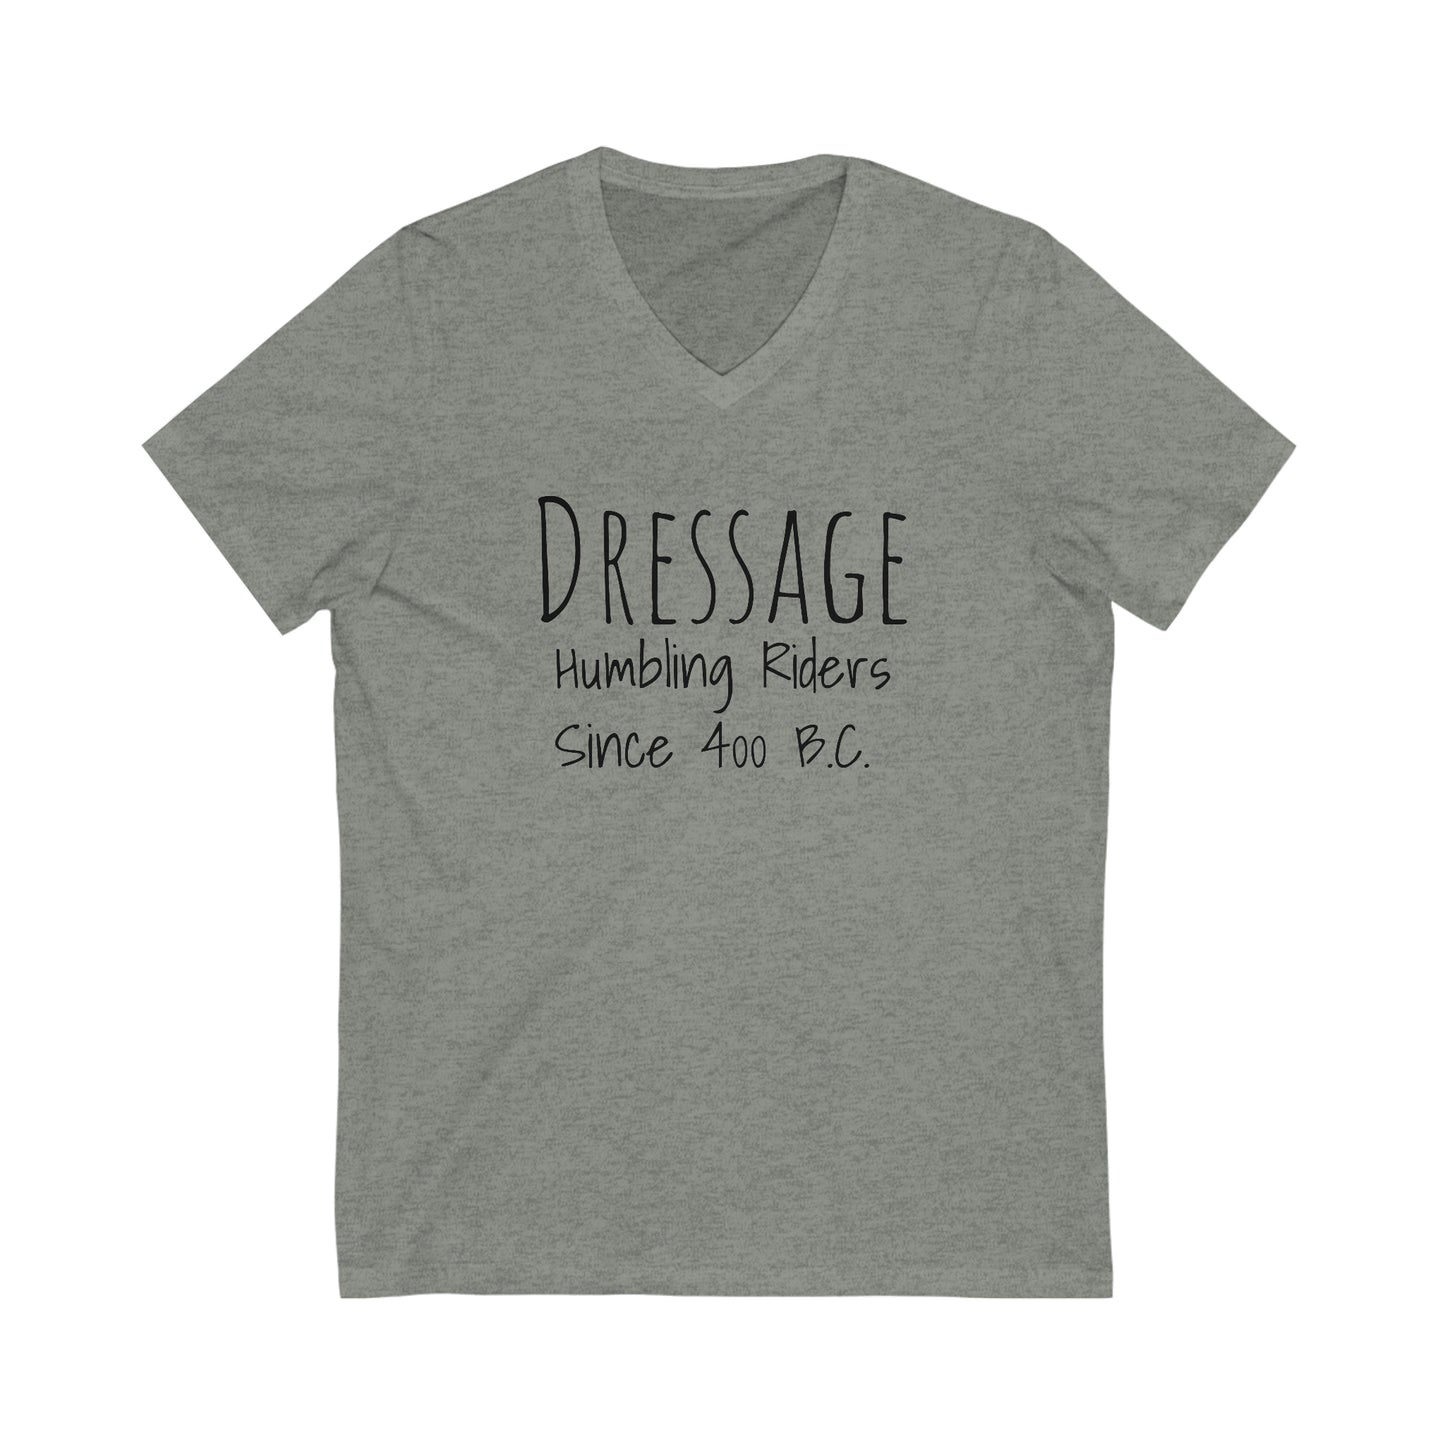 Shirt - Dressage, Humbling Riders Since 400 B.C. (V Neck Relaxed)